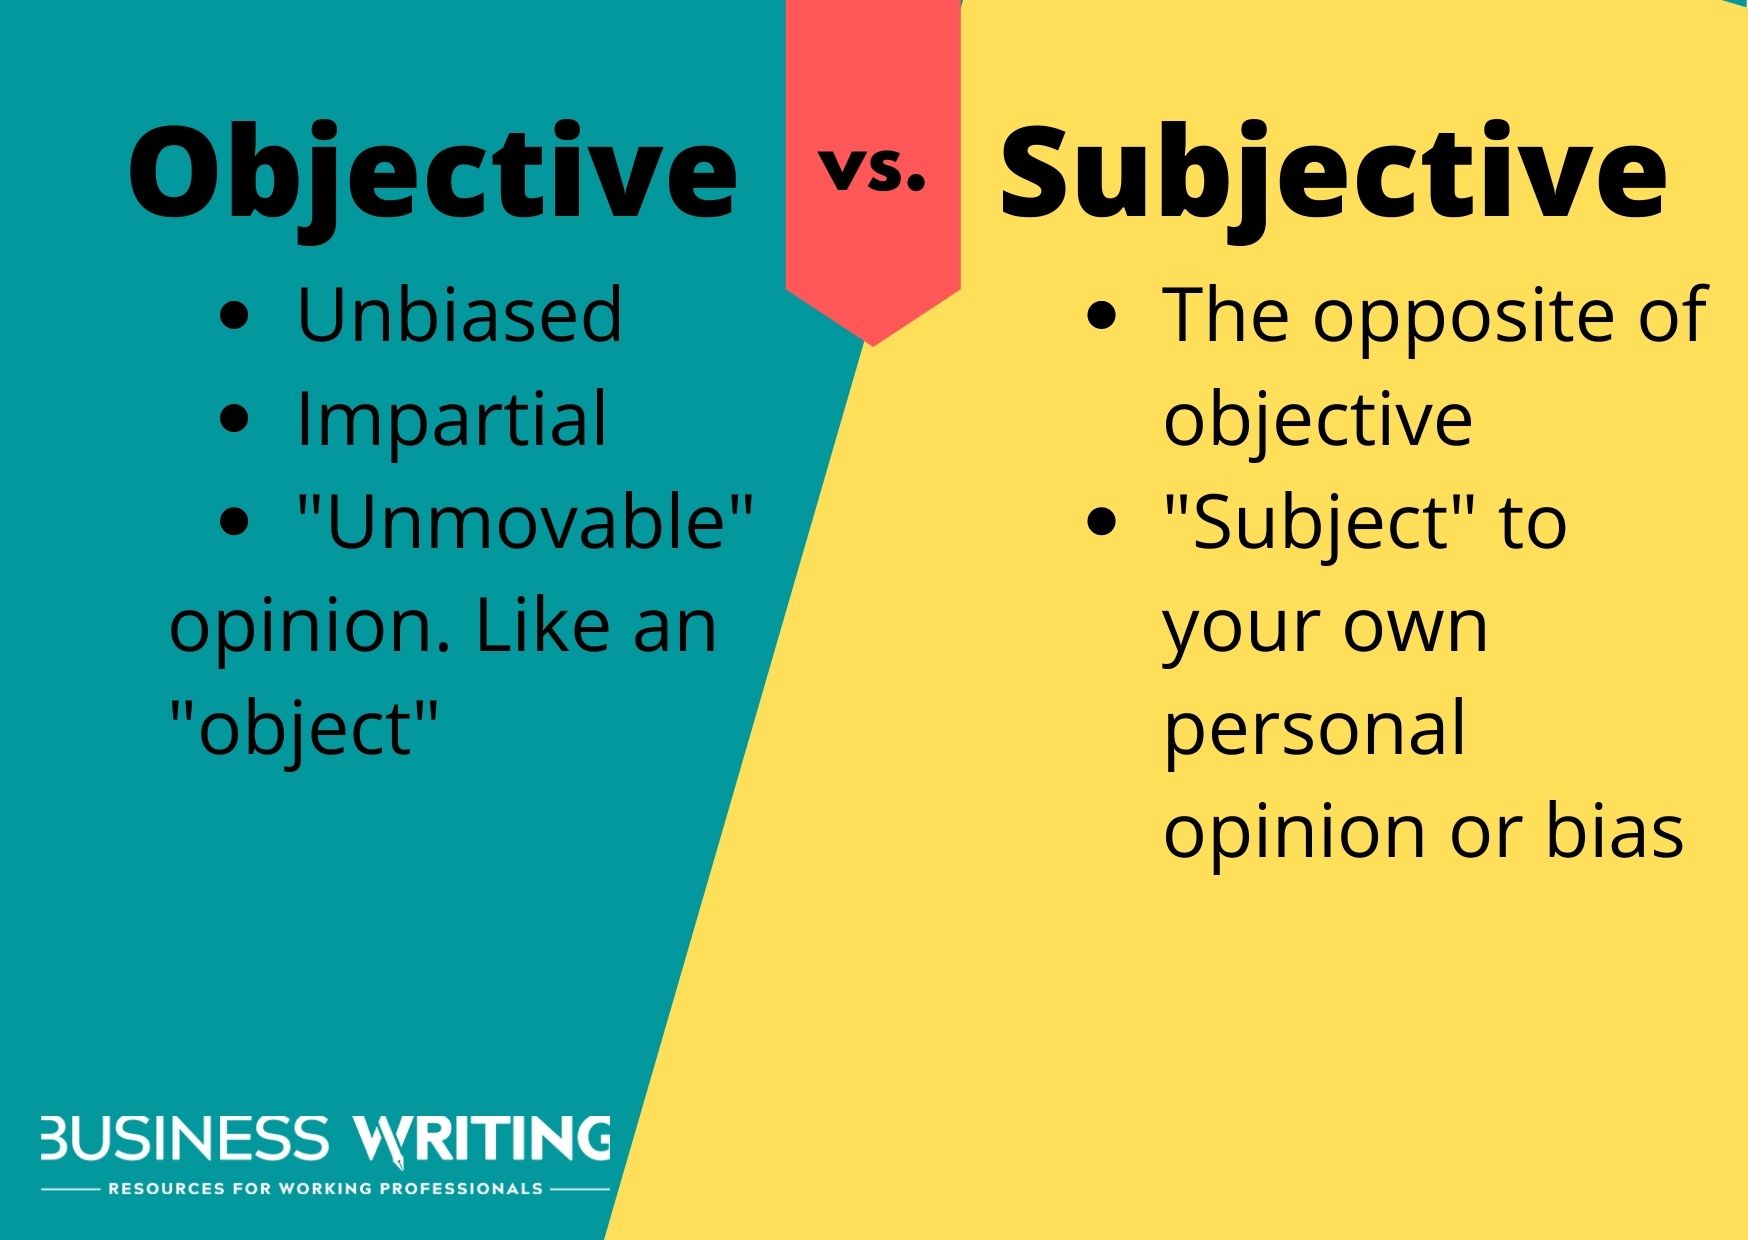 Objective vs. Subjective explanation. Objective (impartial opinion), Subjective (biased opinion)